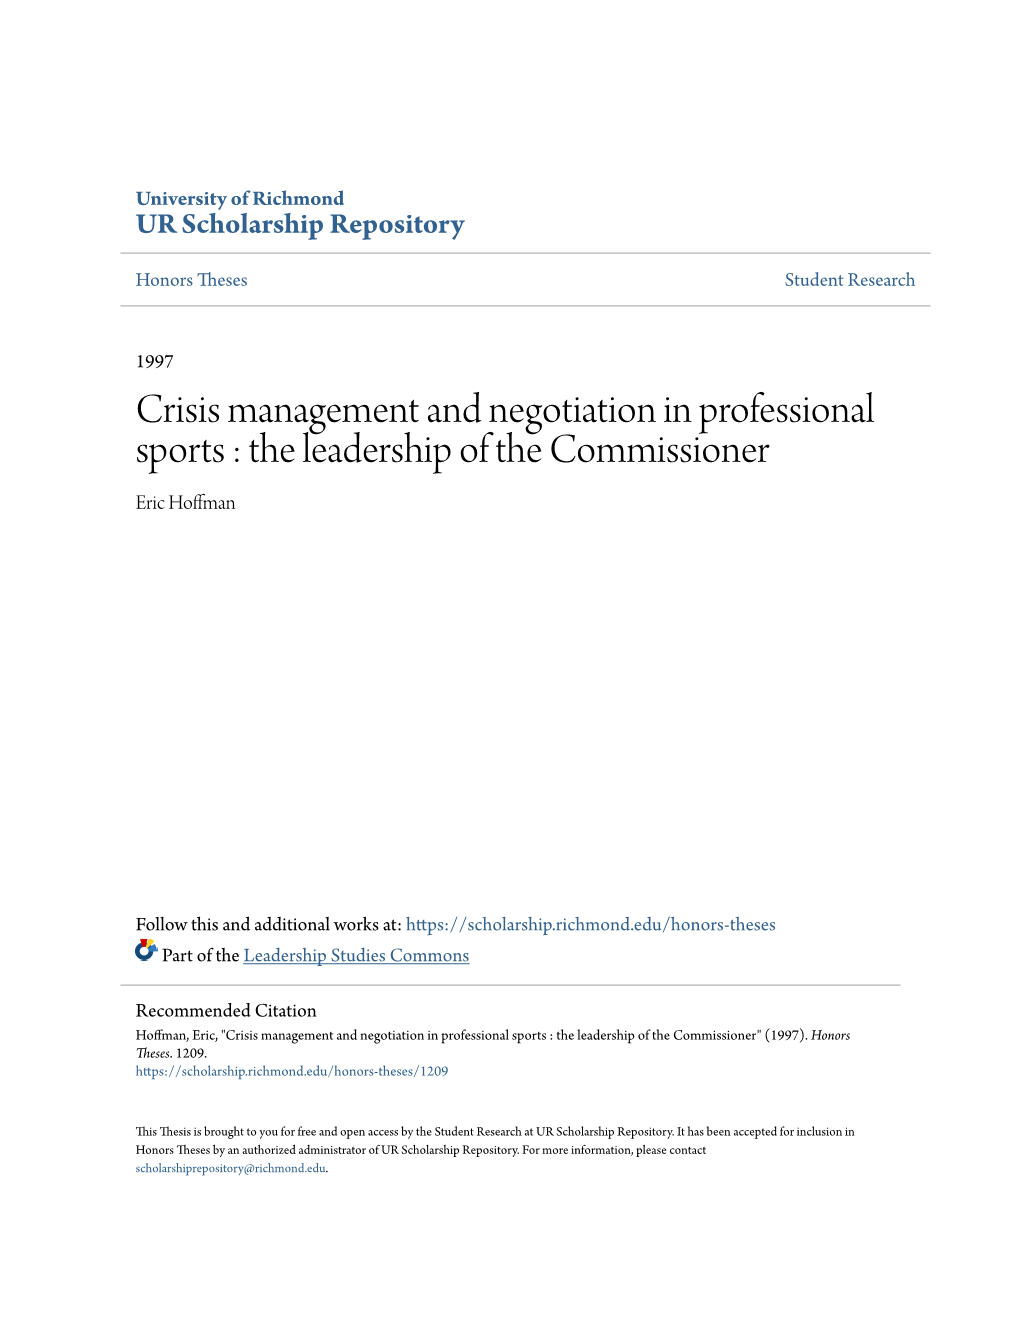 Crisis Management and Negotiation in Professional Sports : the Leadership of the Commissioner Eric Hoffman